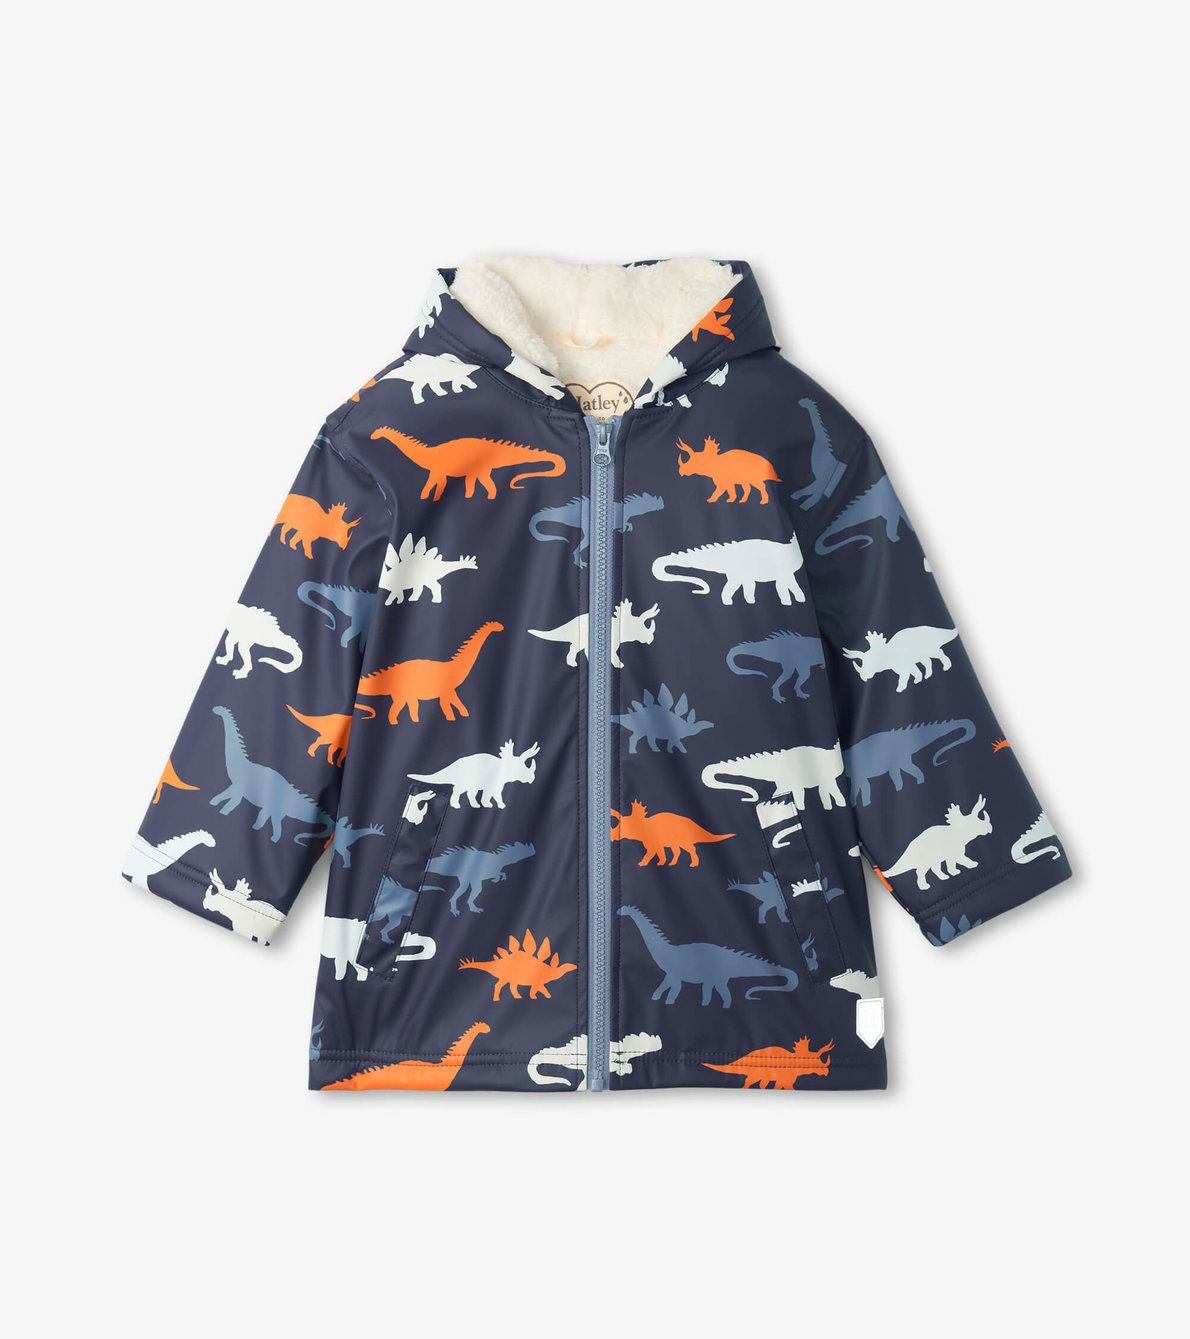 View larger image of Dinosaur Silhouettes Colour Changing Kids Raincoat